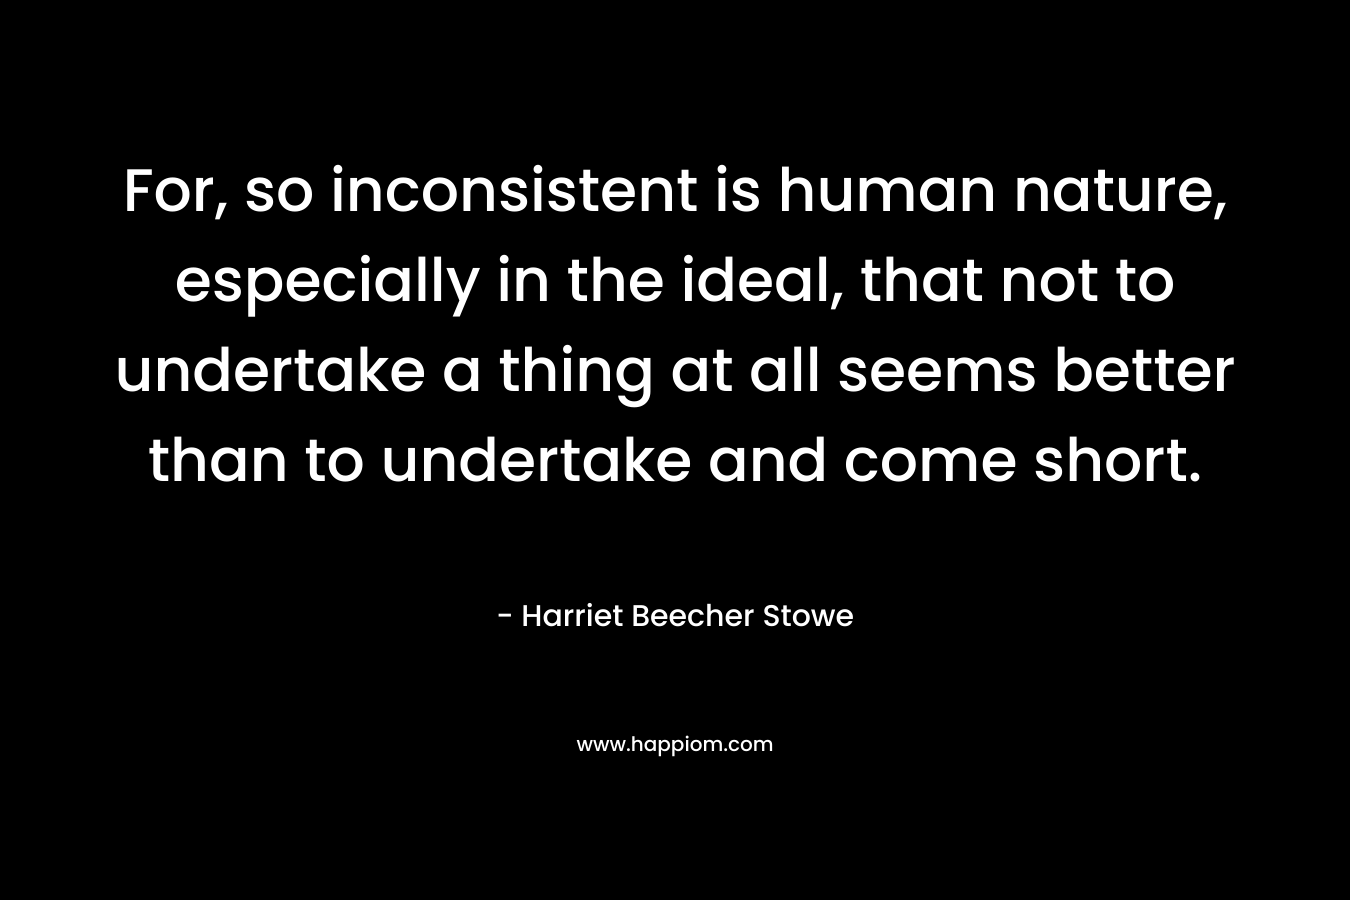 For, so inconsistent is human nature, especially in the ideal, that not to undertake a thing at all seems better than to undertake and come short.